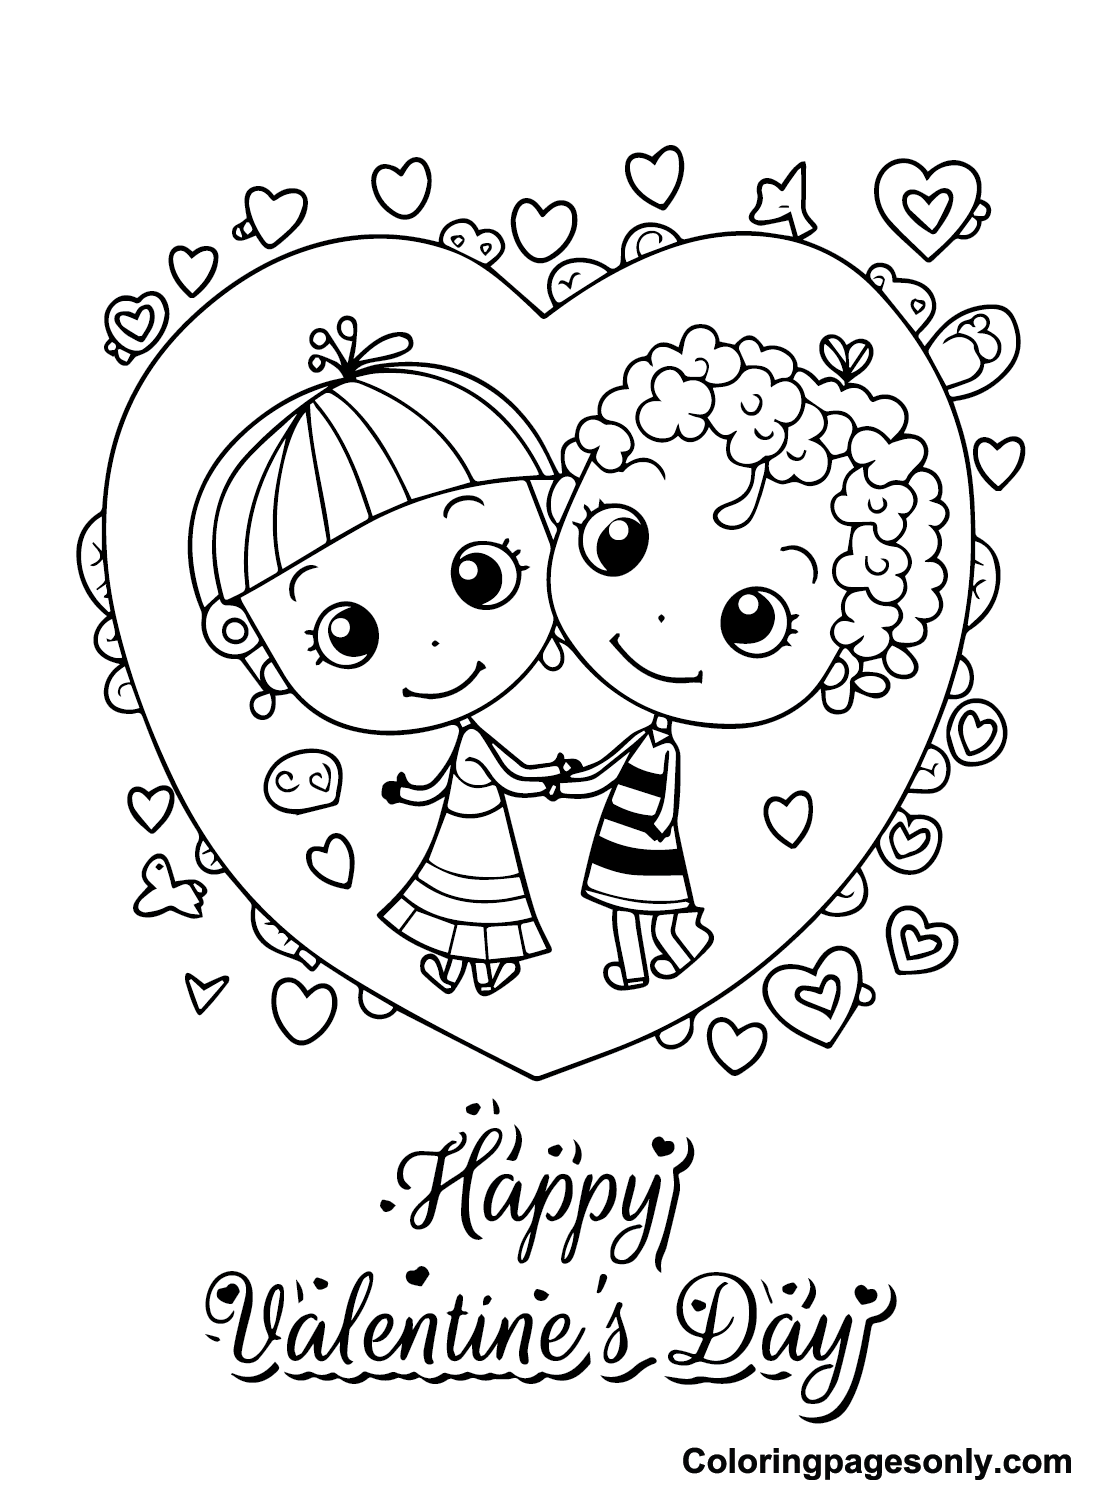 Valentines Day Cards Images Coloring Page